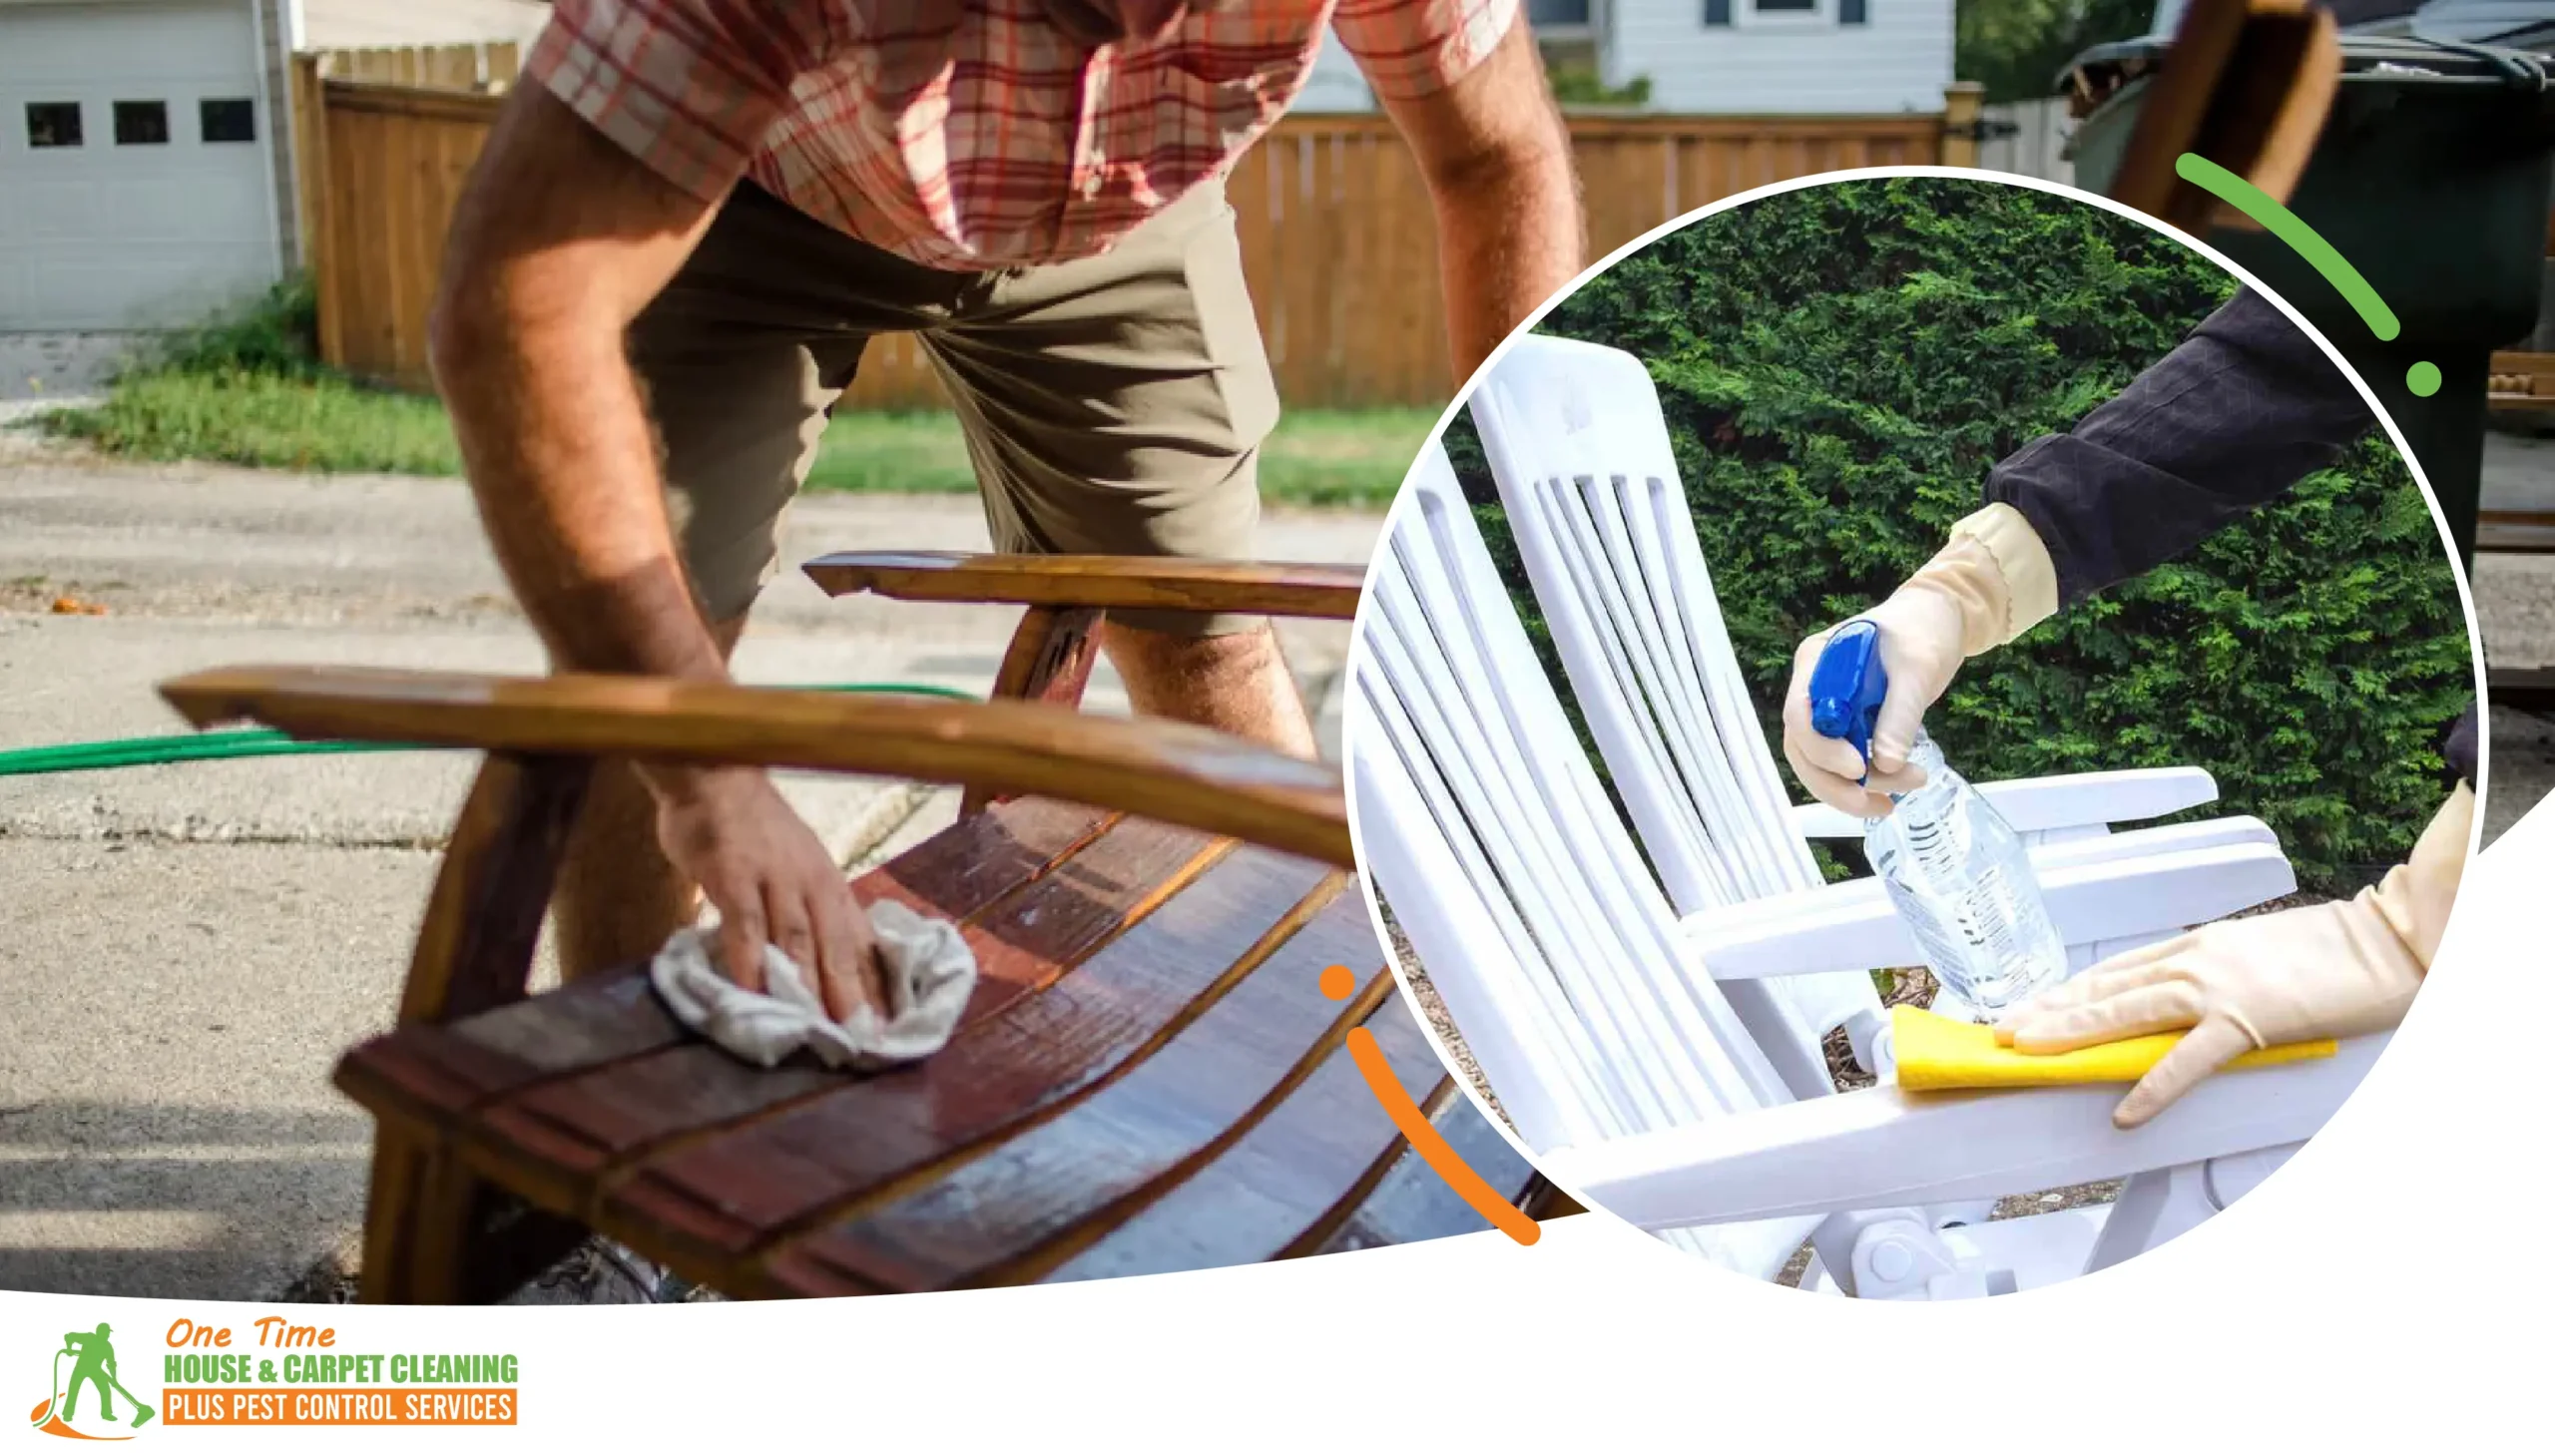 man-cleaning-outdoor-furniture-along-with-hands-wiping-outdoor-patio-furniture